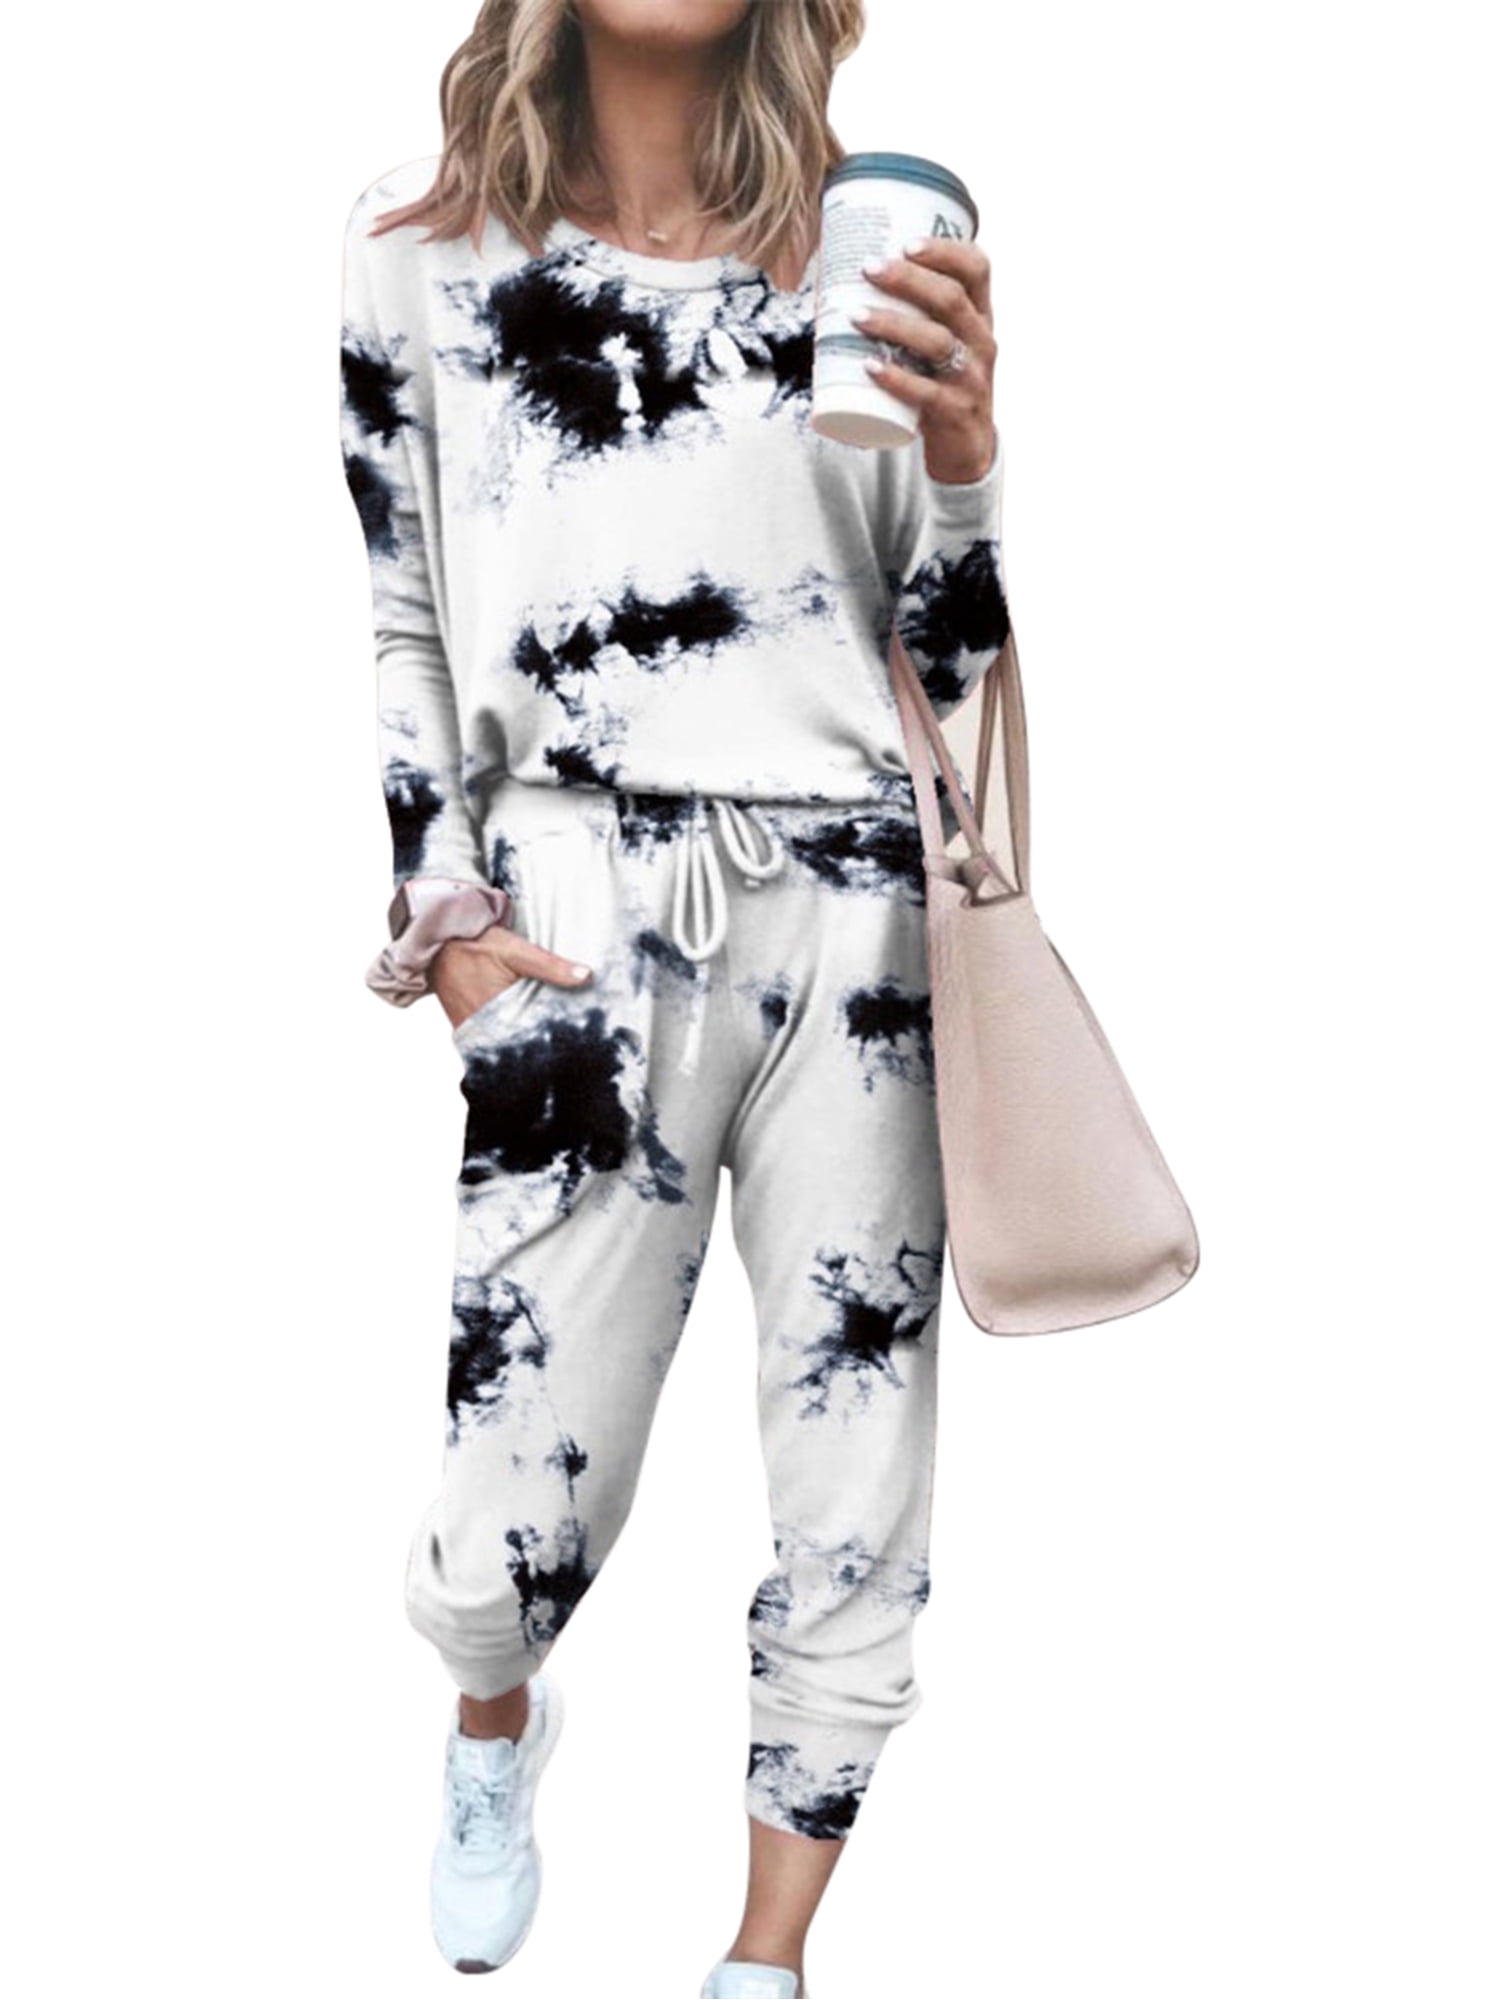 Details about   Womens SummerTracksuit Tie Dye Printed Loungewear Sets Tops Drawstring Shorts